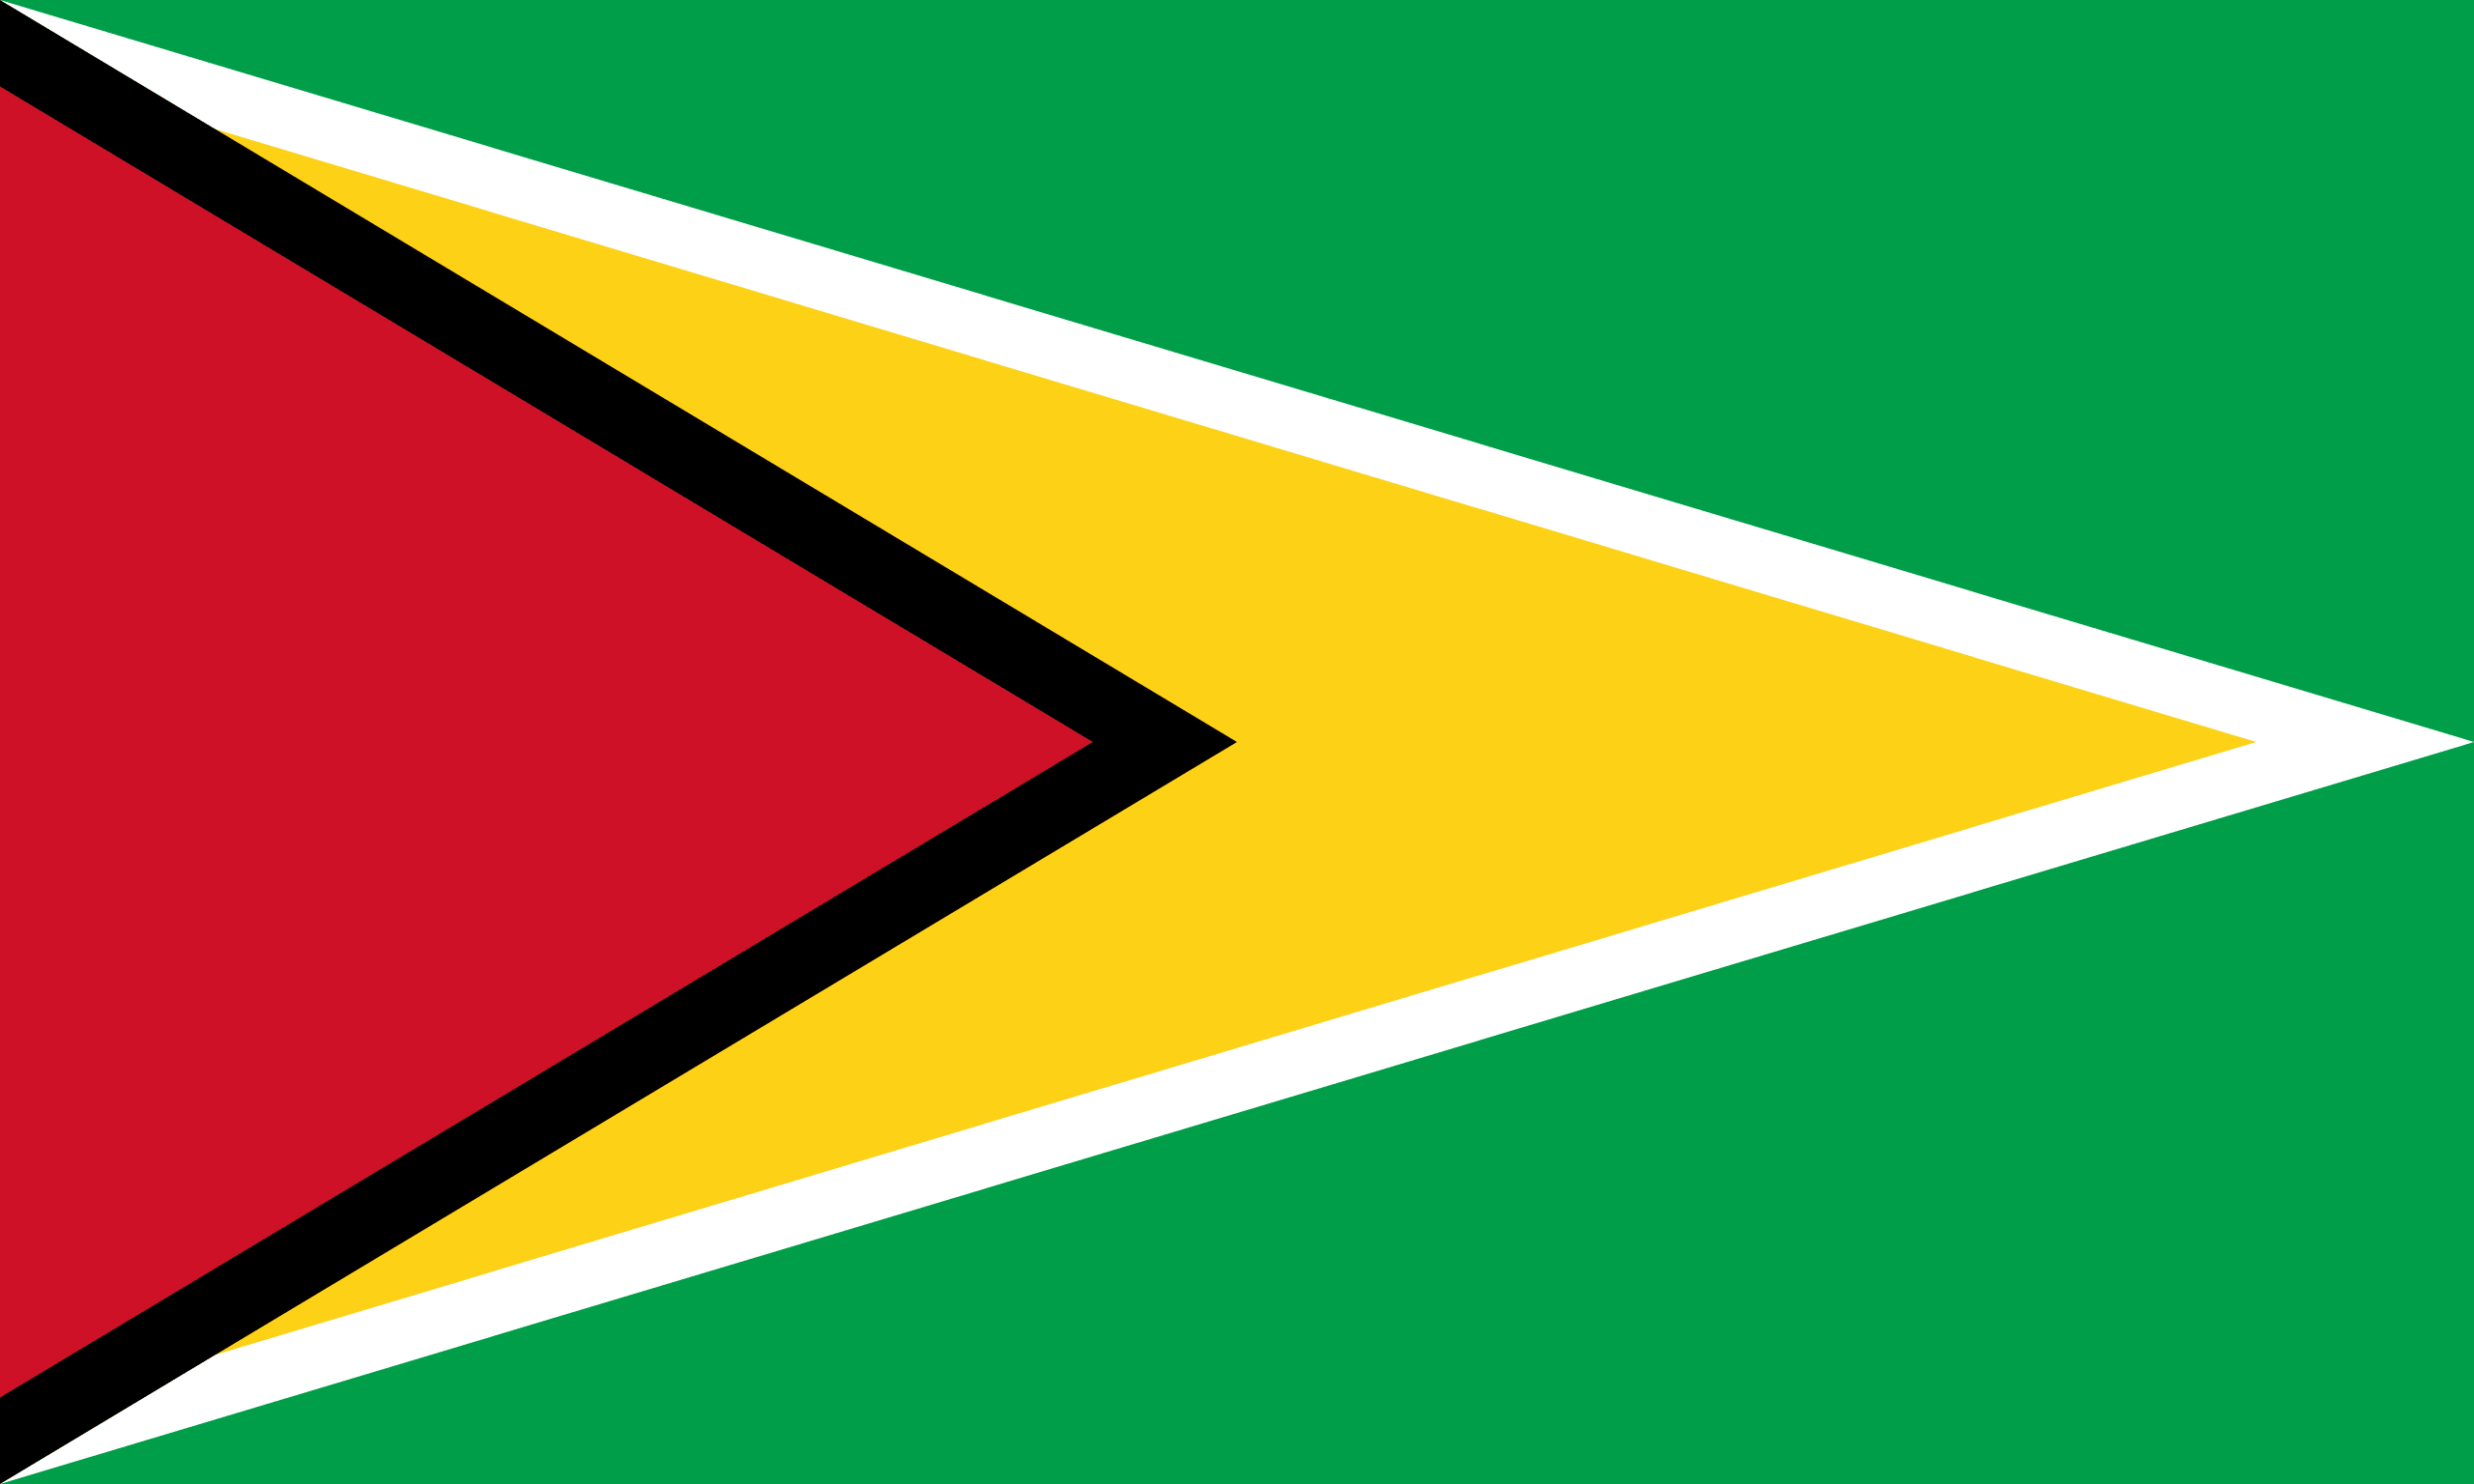 Cryptocurrency for Beginners in Guyana